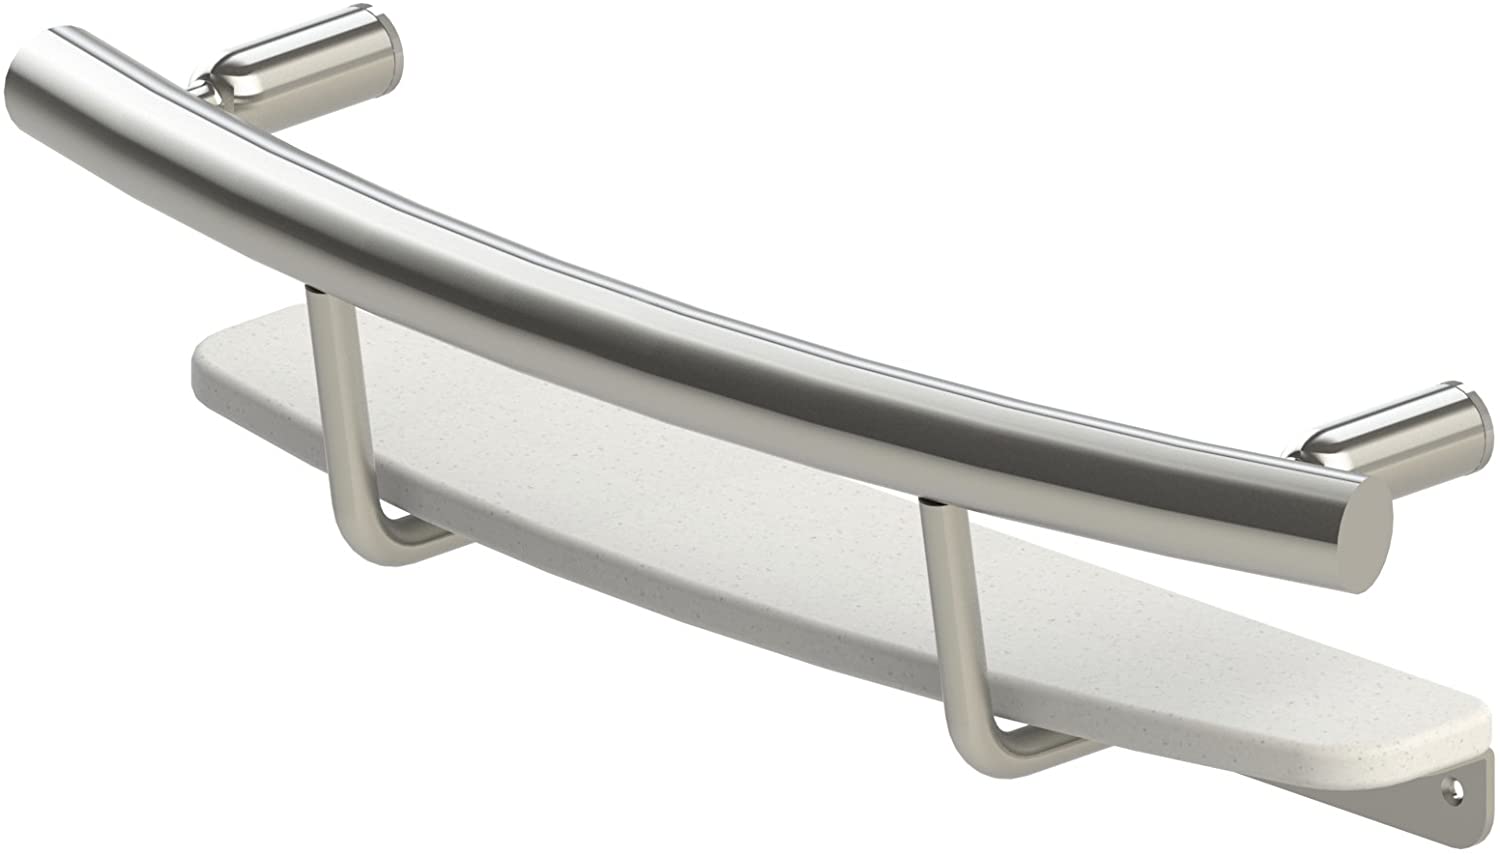 Invisia,INV-SHS-BS,Stainless Steel,Brushed Stainless